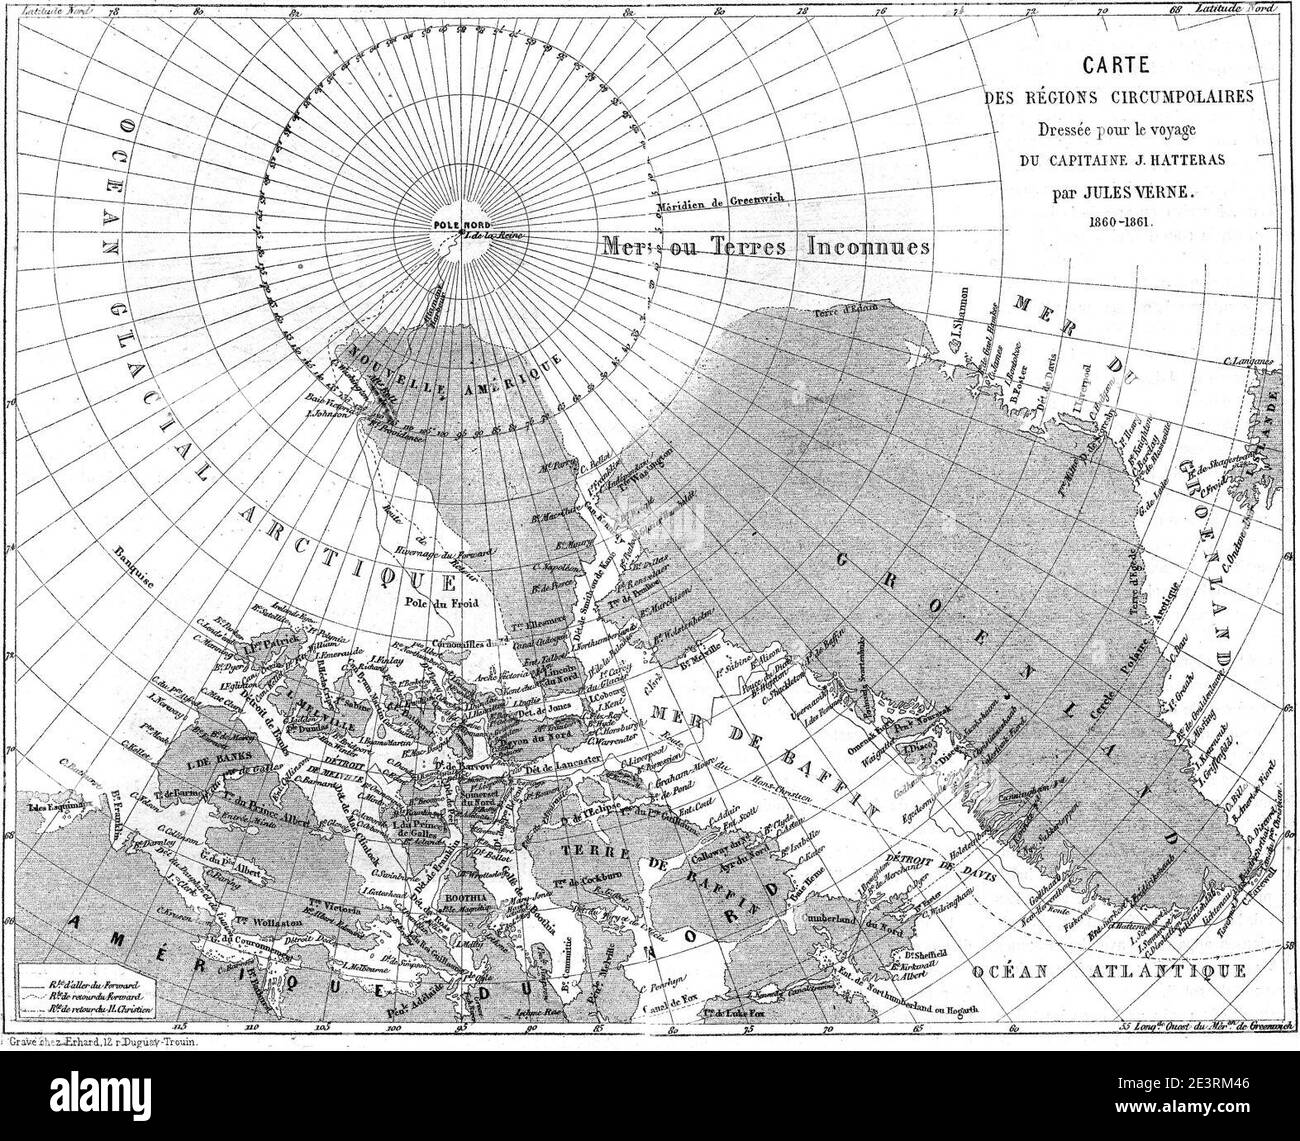 Map from Journeys and Adventures of Captain Hatteras by Jules Verne. Stock Photo